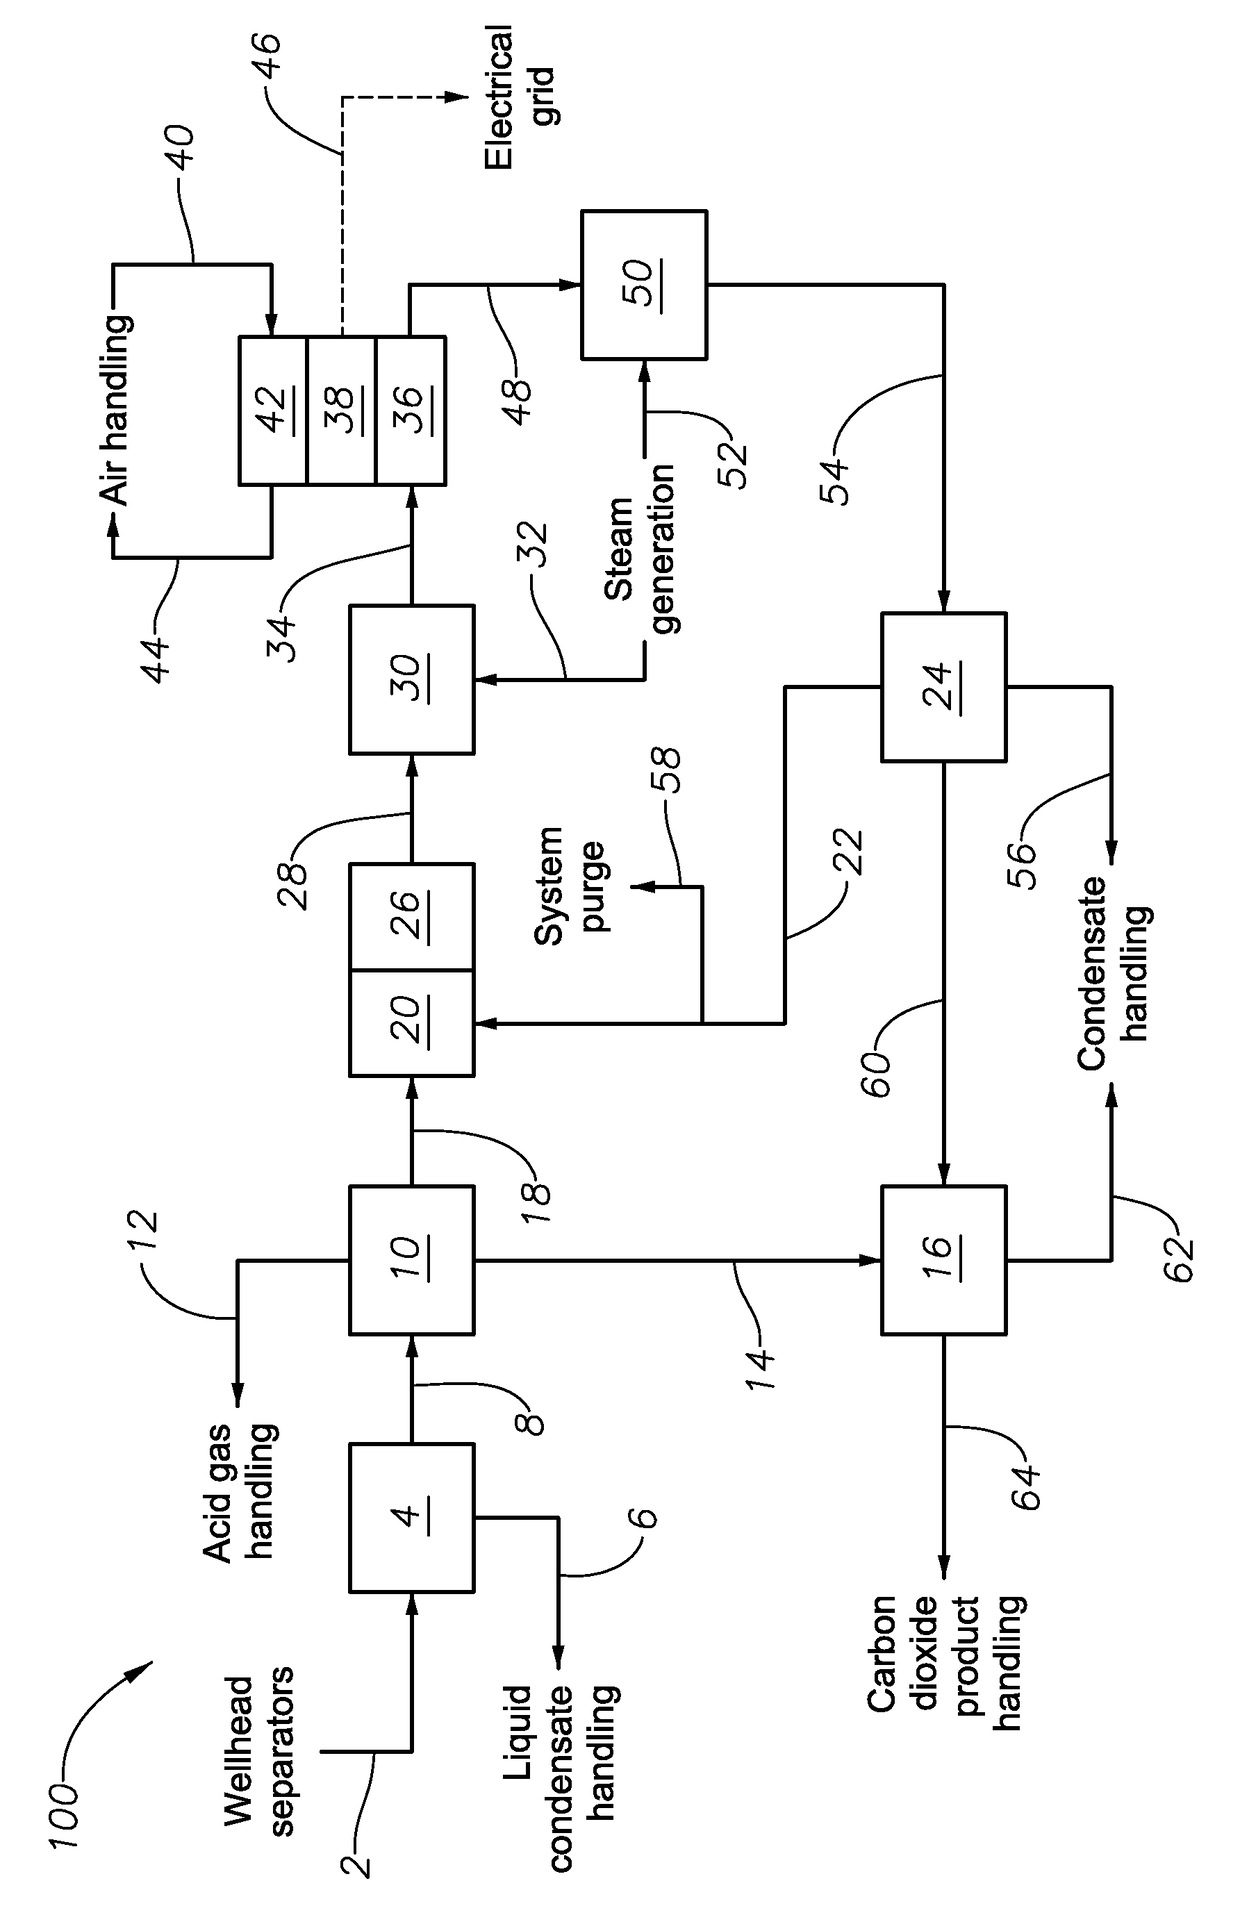 System and method for generating power and enhanced oil recovery